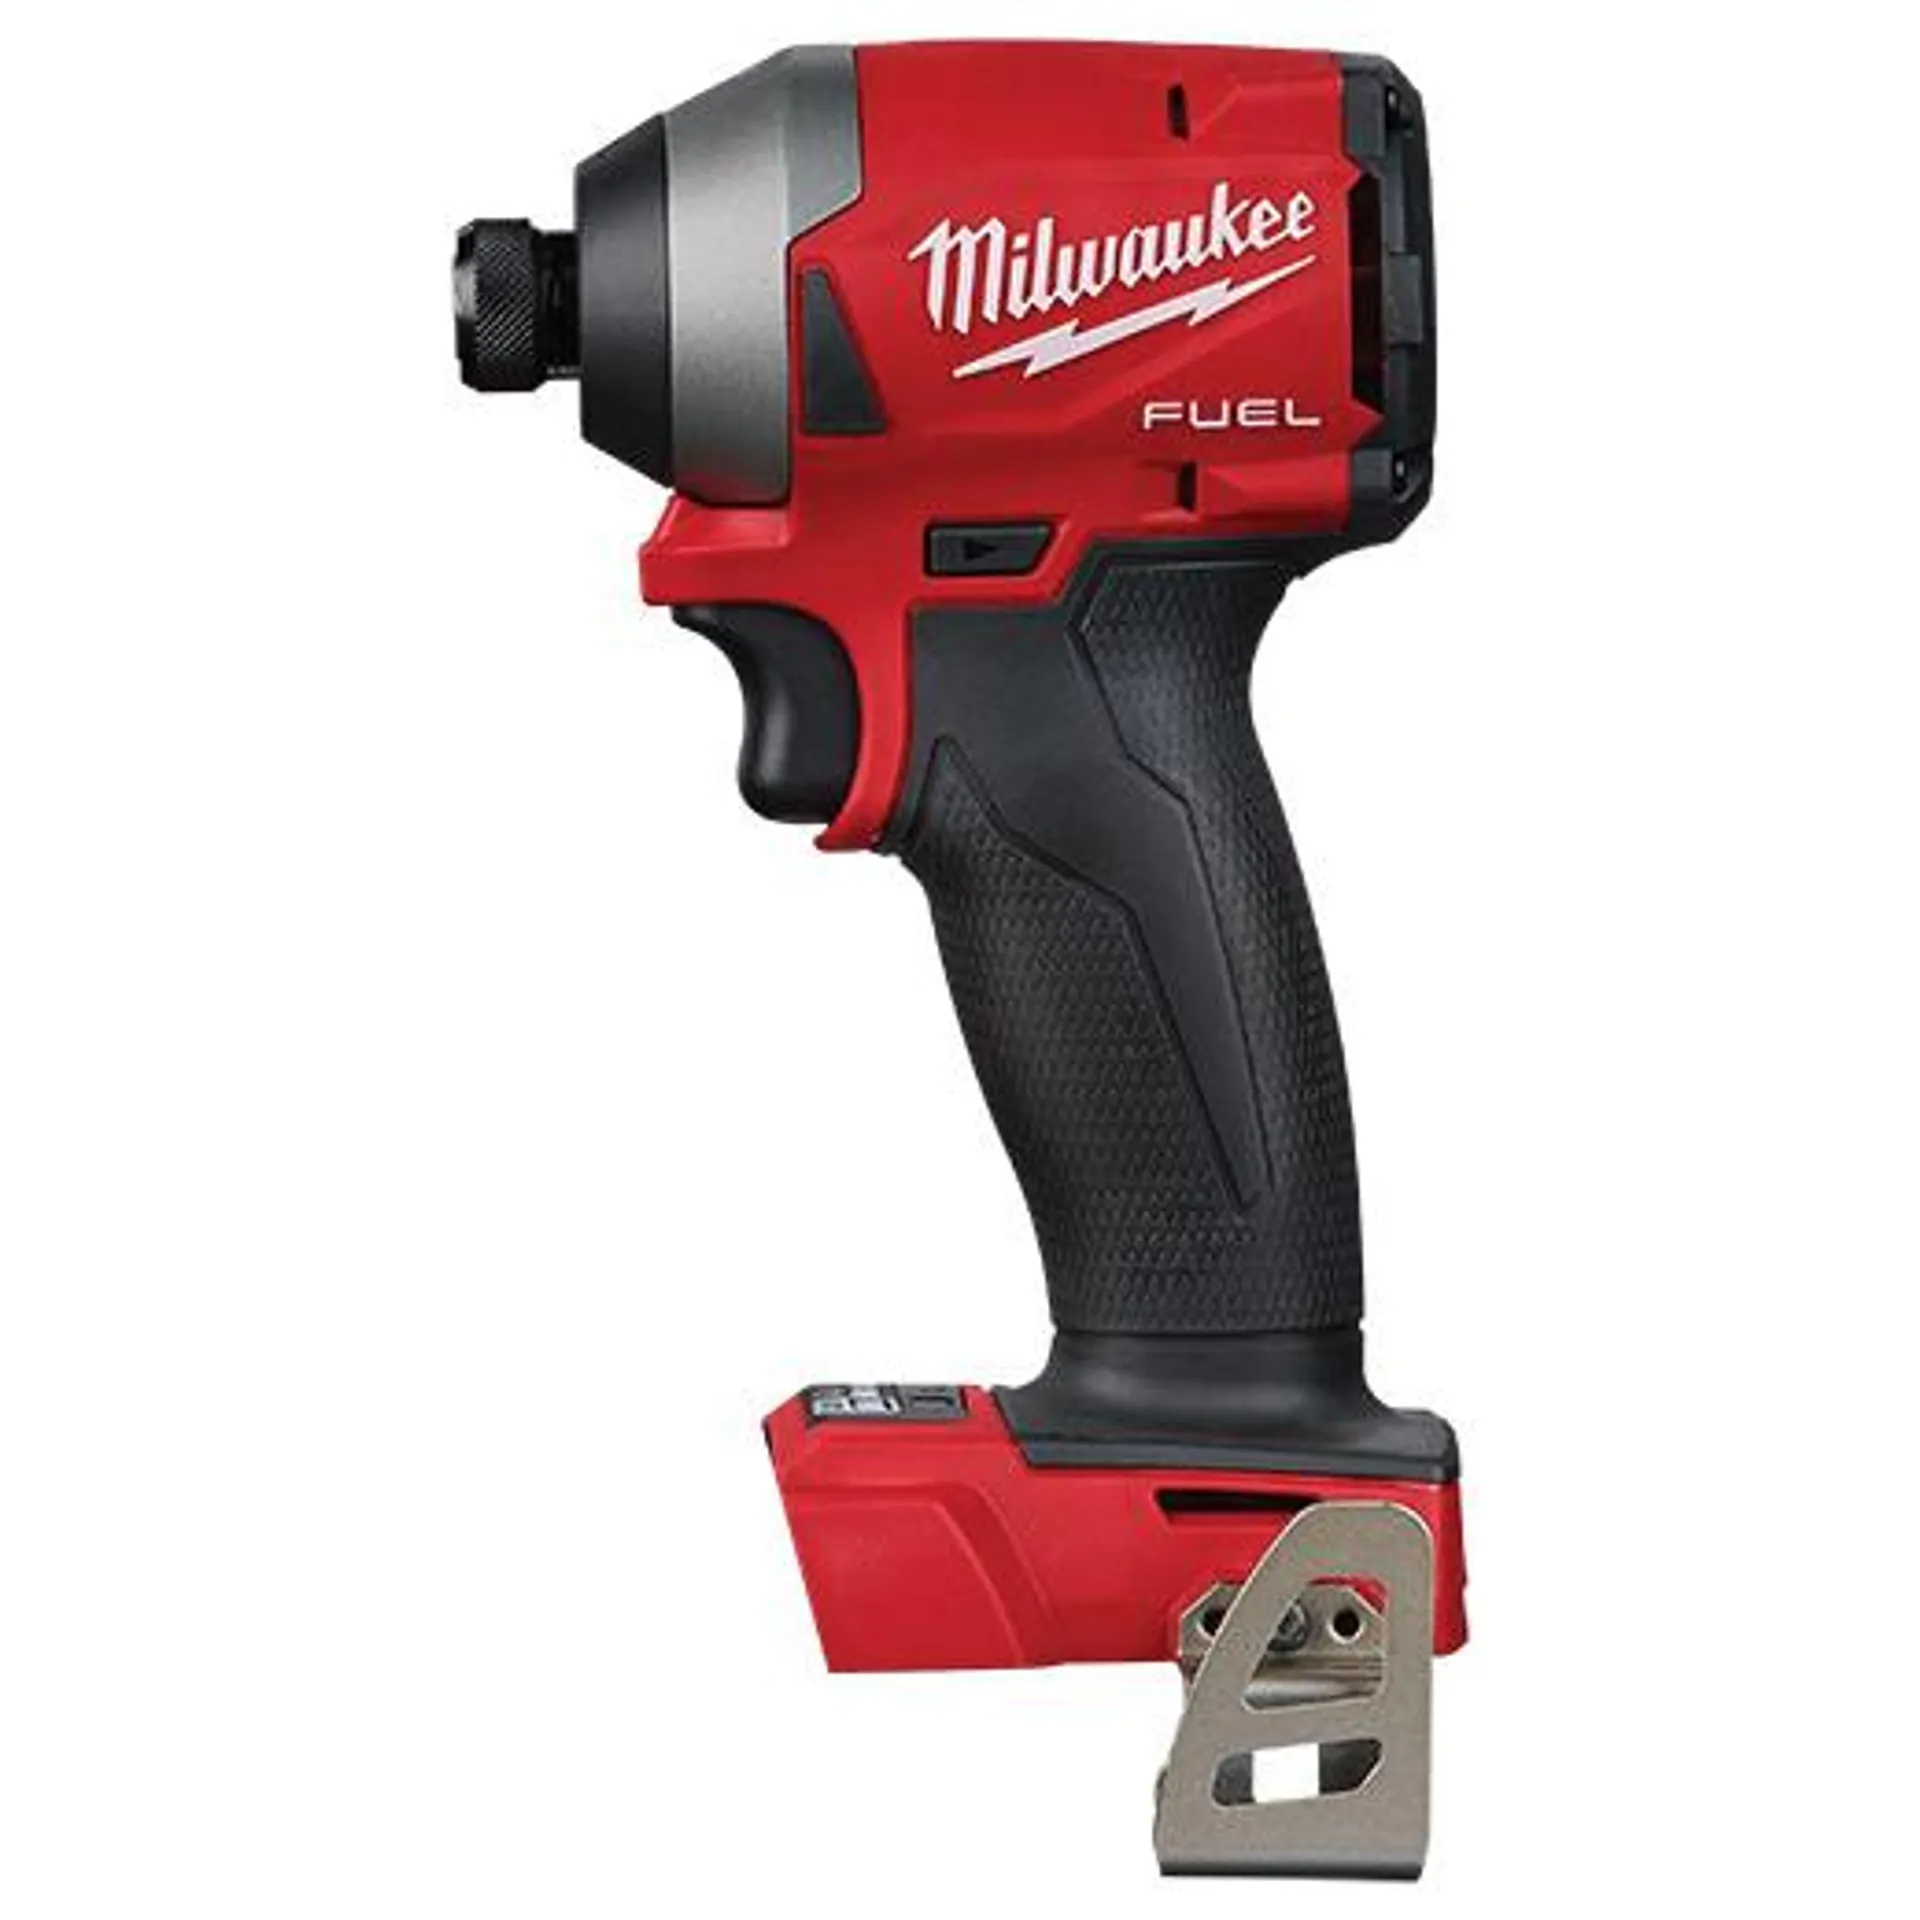 M18 FUEL 2853-20 Impact Driver, Tool Only, 18 V, 1/4 in Drive, Hex Drive, 0 to 4300 ipm